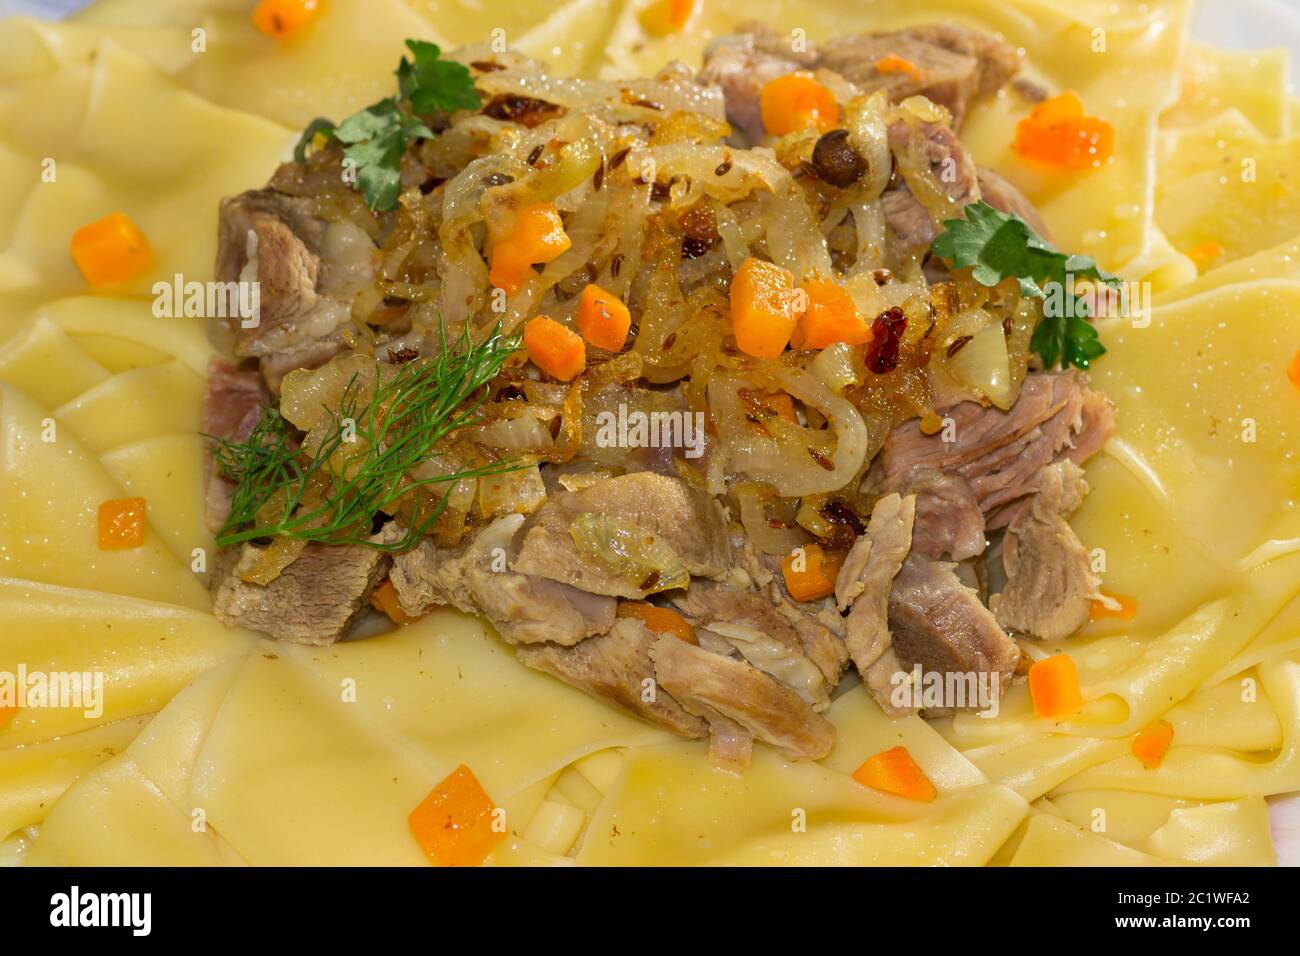 Beshbarmak - a traditional dish in Central Asia Stock Photo